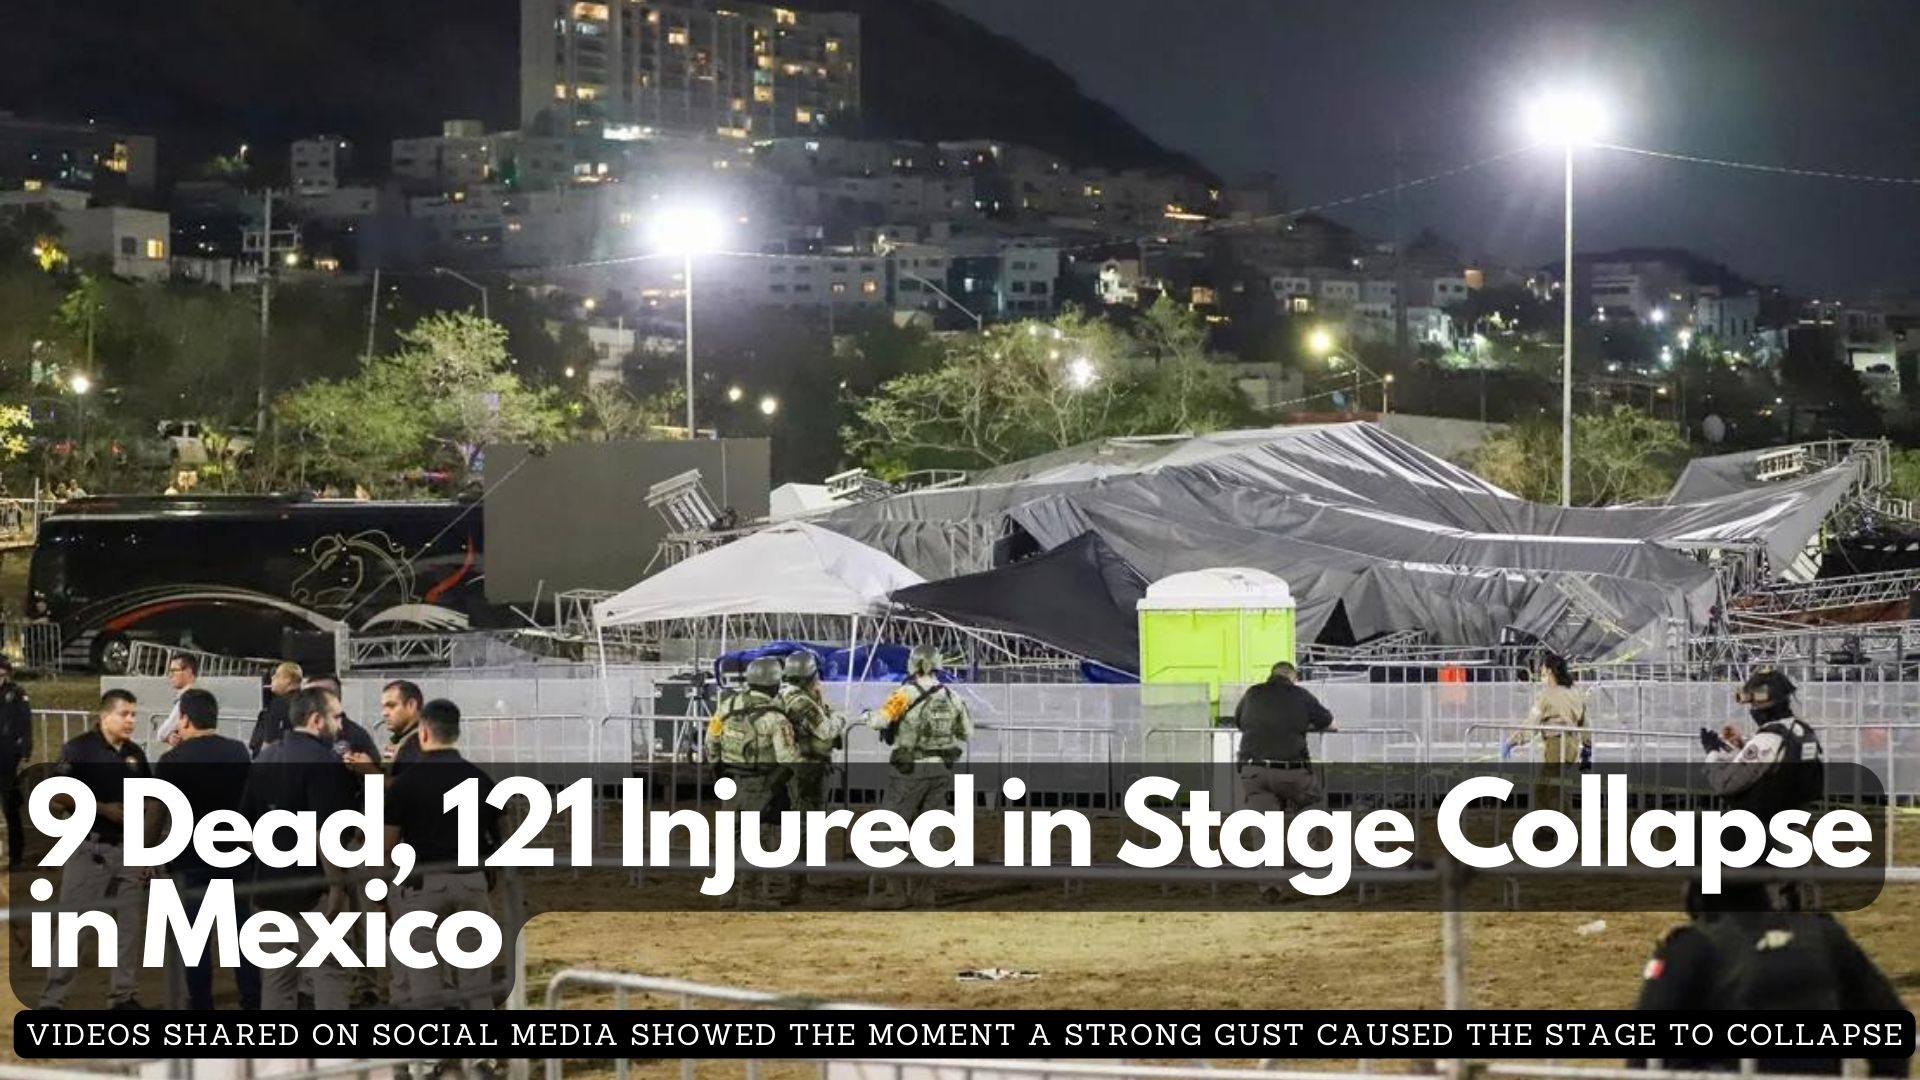 9 Dead, 121 Injured in Stage Collapse in Mexico